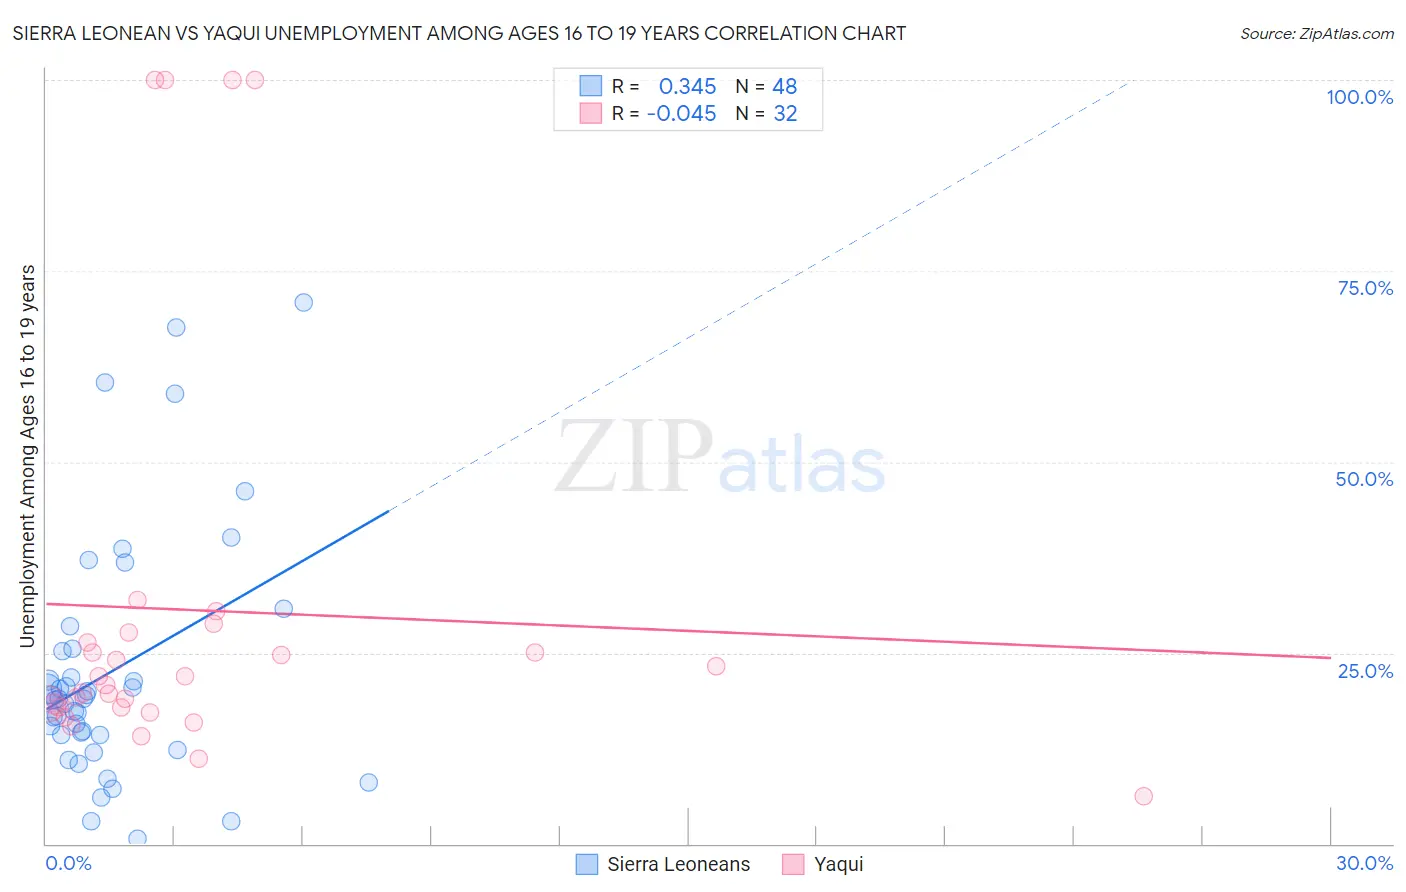 Sierra Leonean vs Yaqui Unemployment Among Ages 16 to 19 years